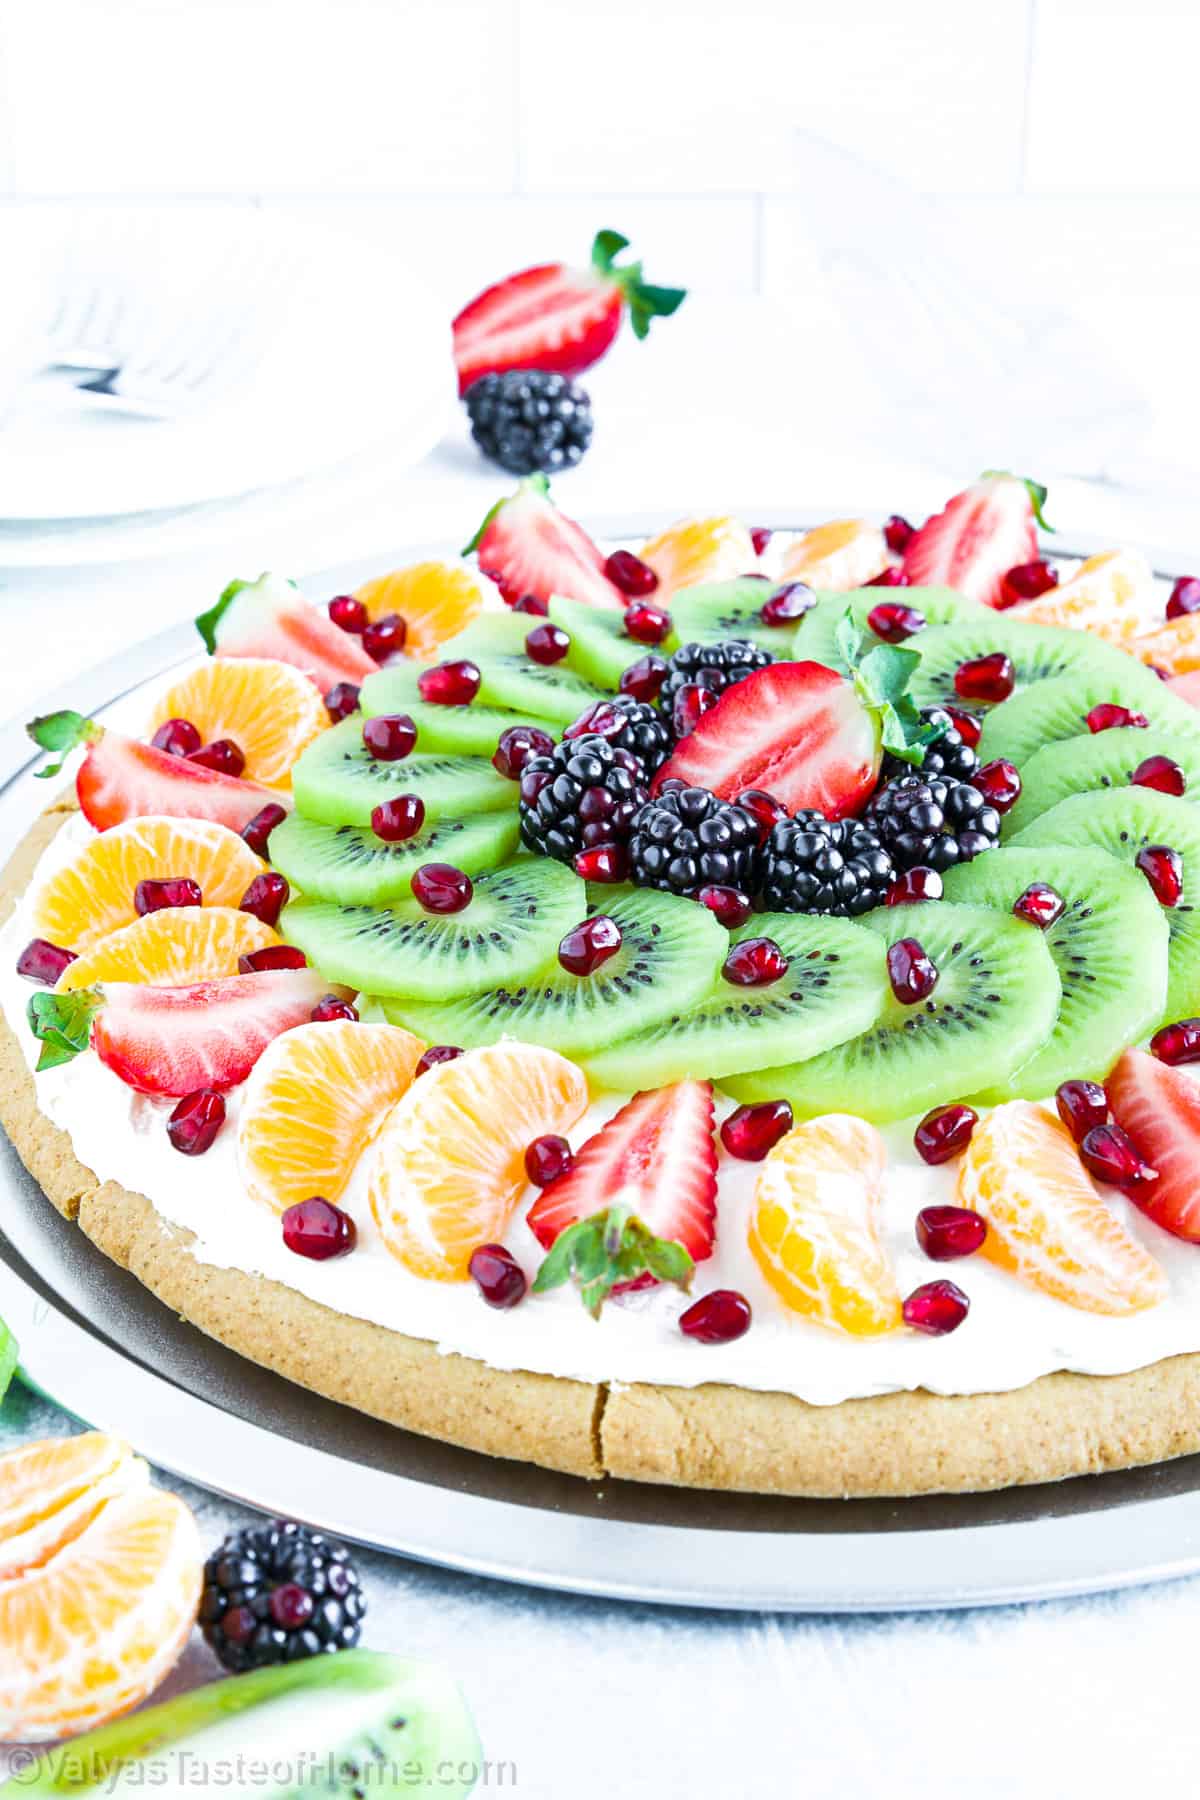 What’s a great dessert option that everyone will love? This sugar cookie fruit pizza recipe is quick and customizable, and a hit among adults and kids alike!